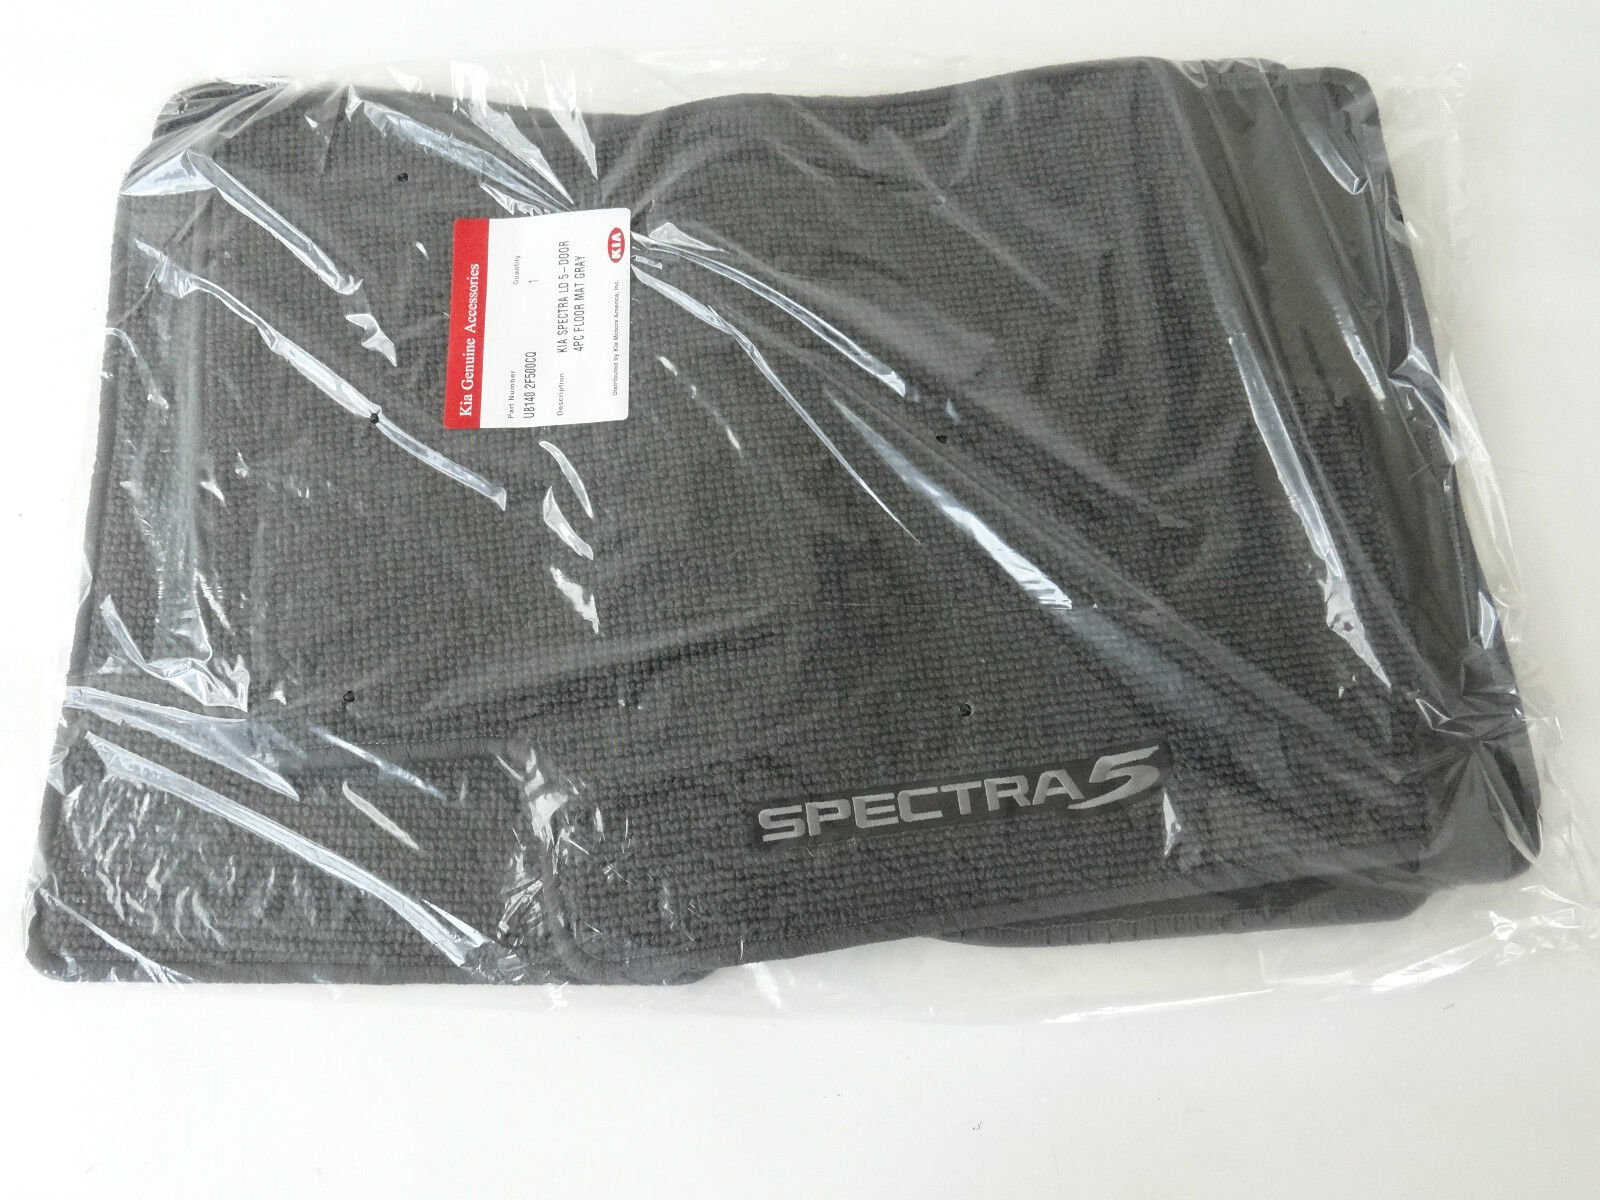 2007-2009 KIA Spectra 5 Spectra5 Replacement Carpeted Floor Mats GRAY NEW 